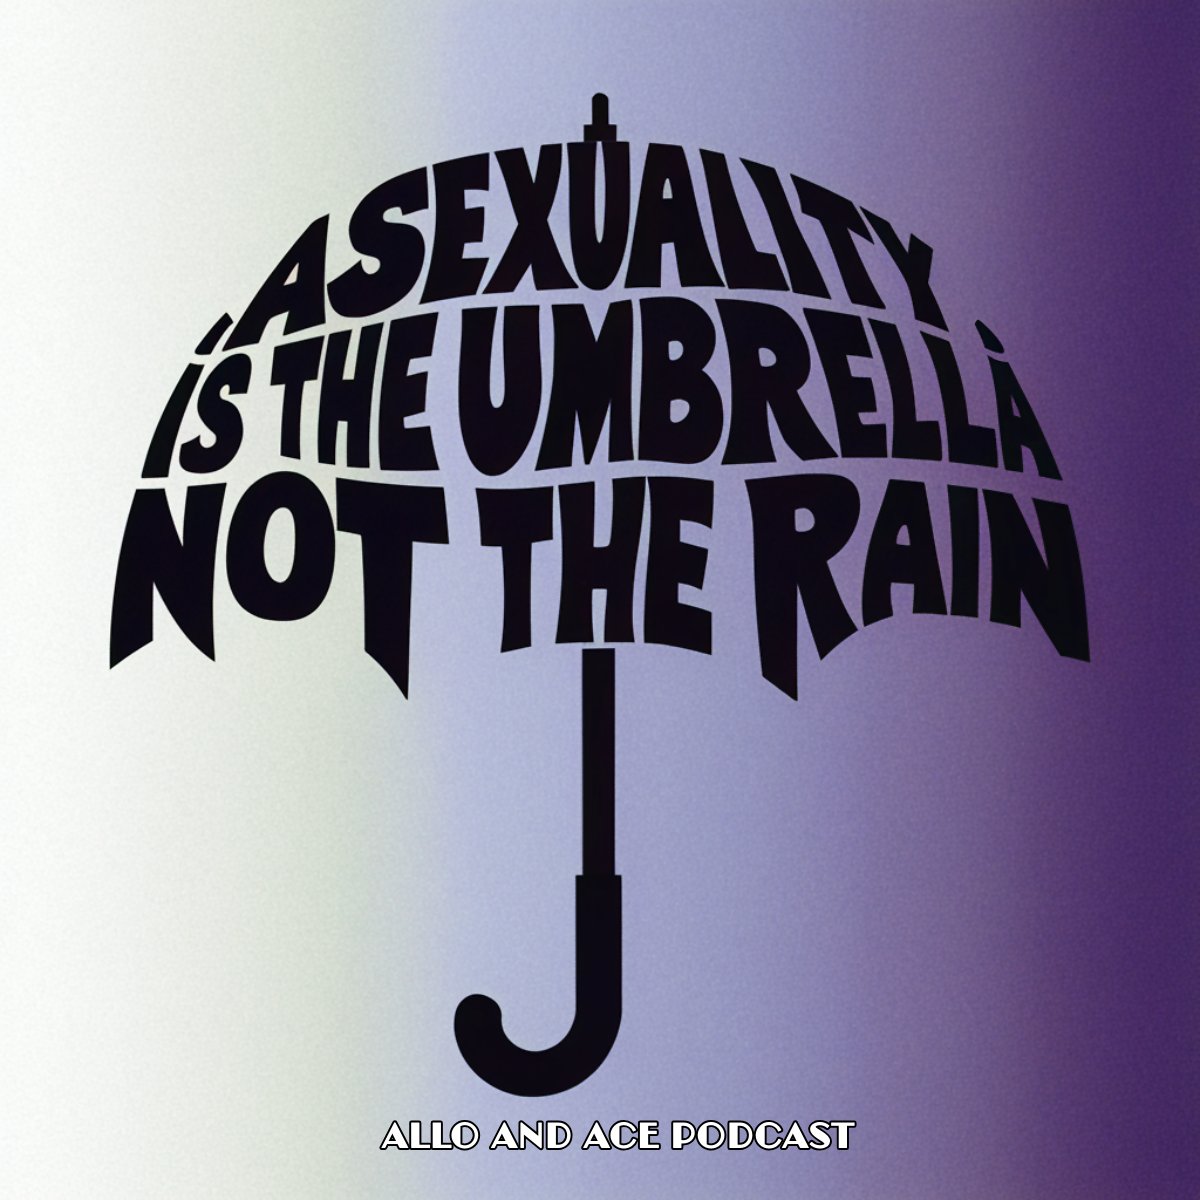 'Asexuality is the umbrella that shelters you from the storm, it is not the storm itself.'
While it can be hard sometimes to realize, asexuality is what actually protects you and helps you create healthy boundaries.💜 #asexual #alloandace